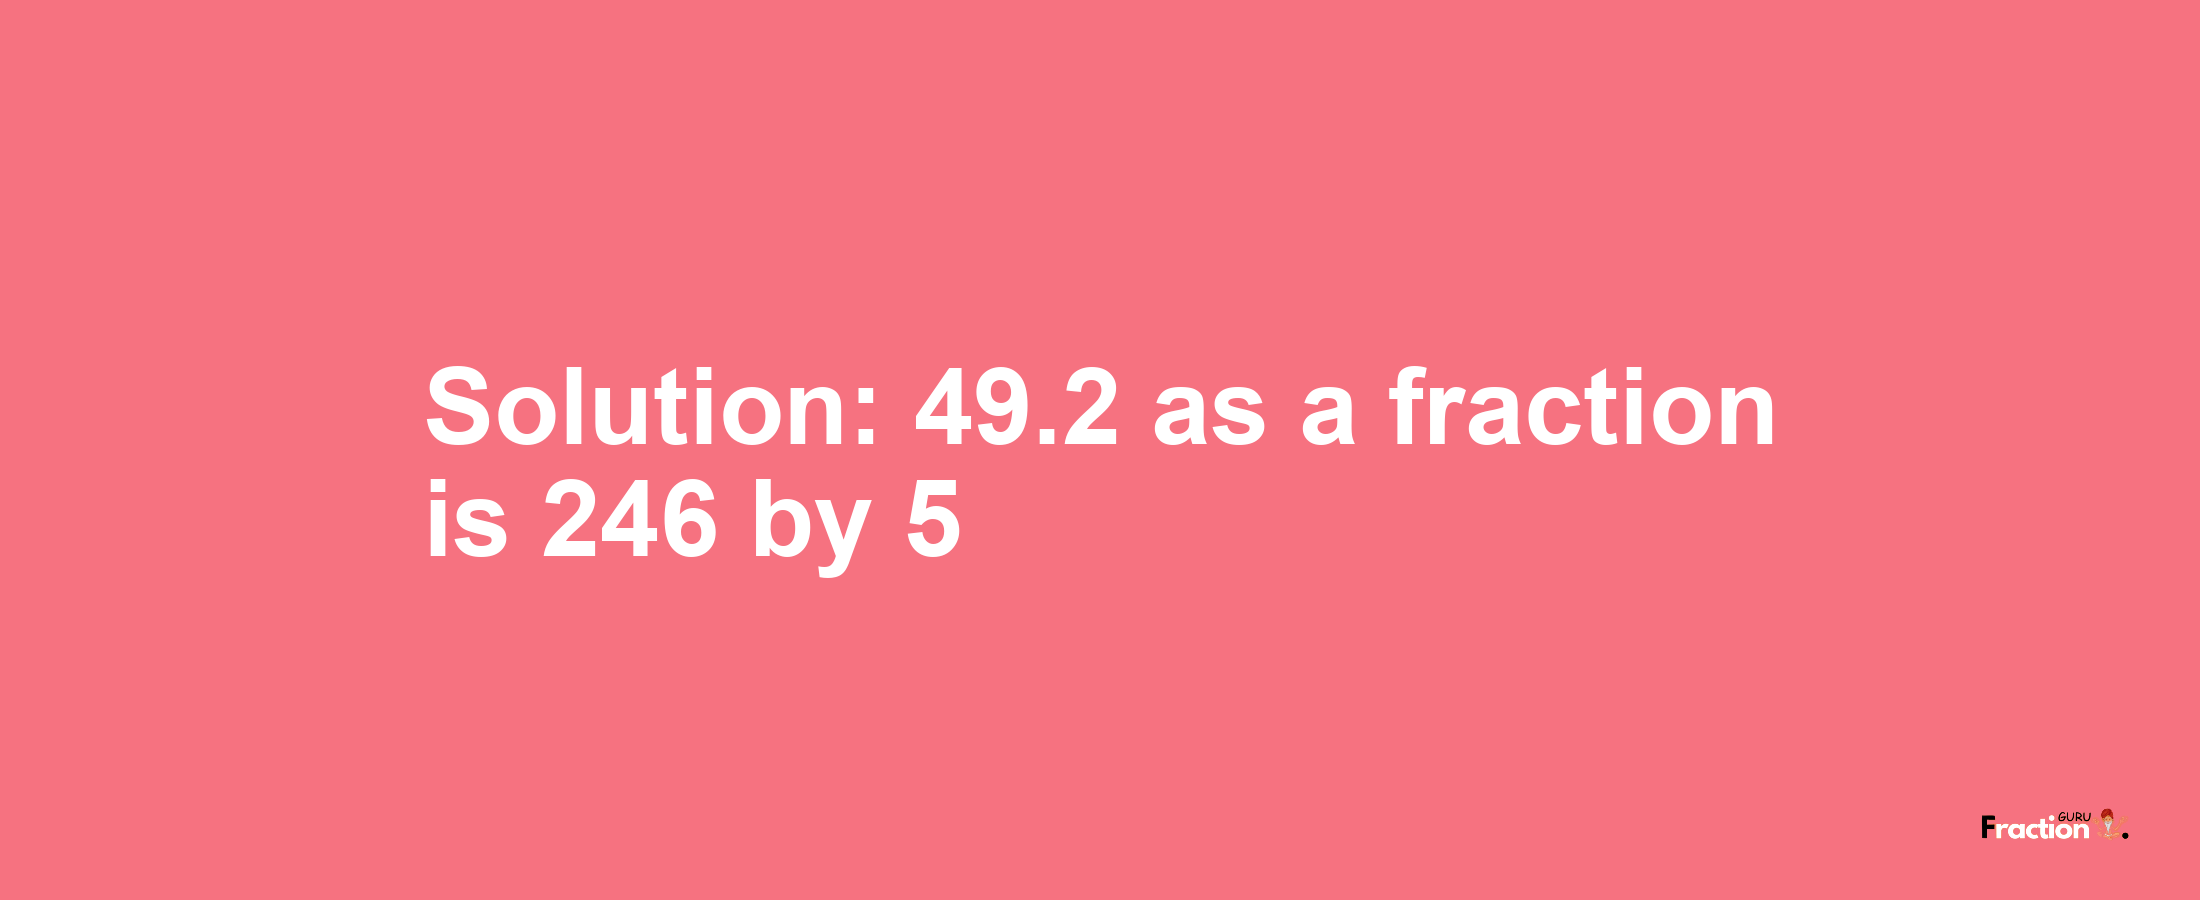 Solution:49.2 as a fraction is 246/5